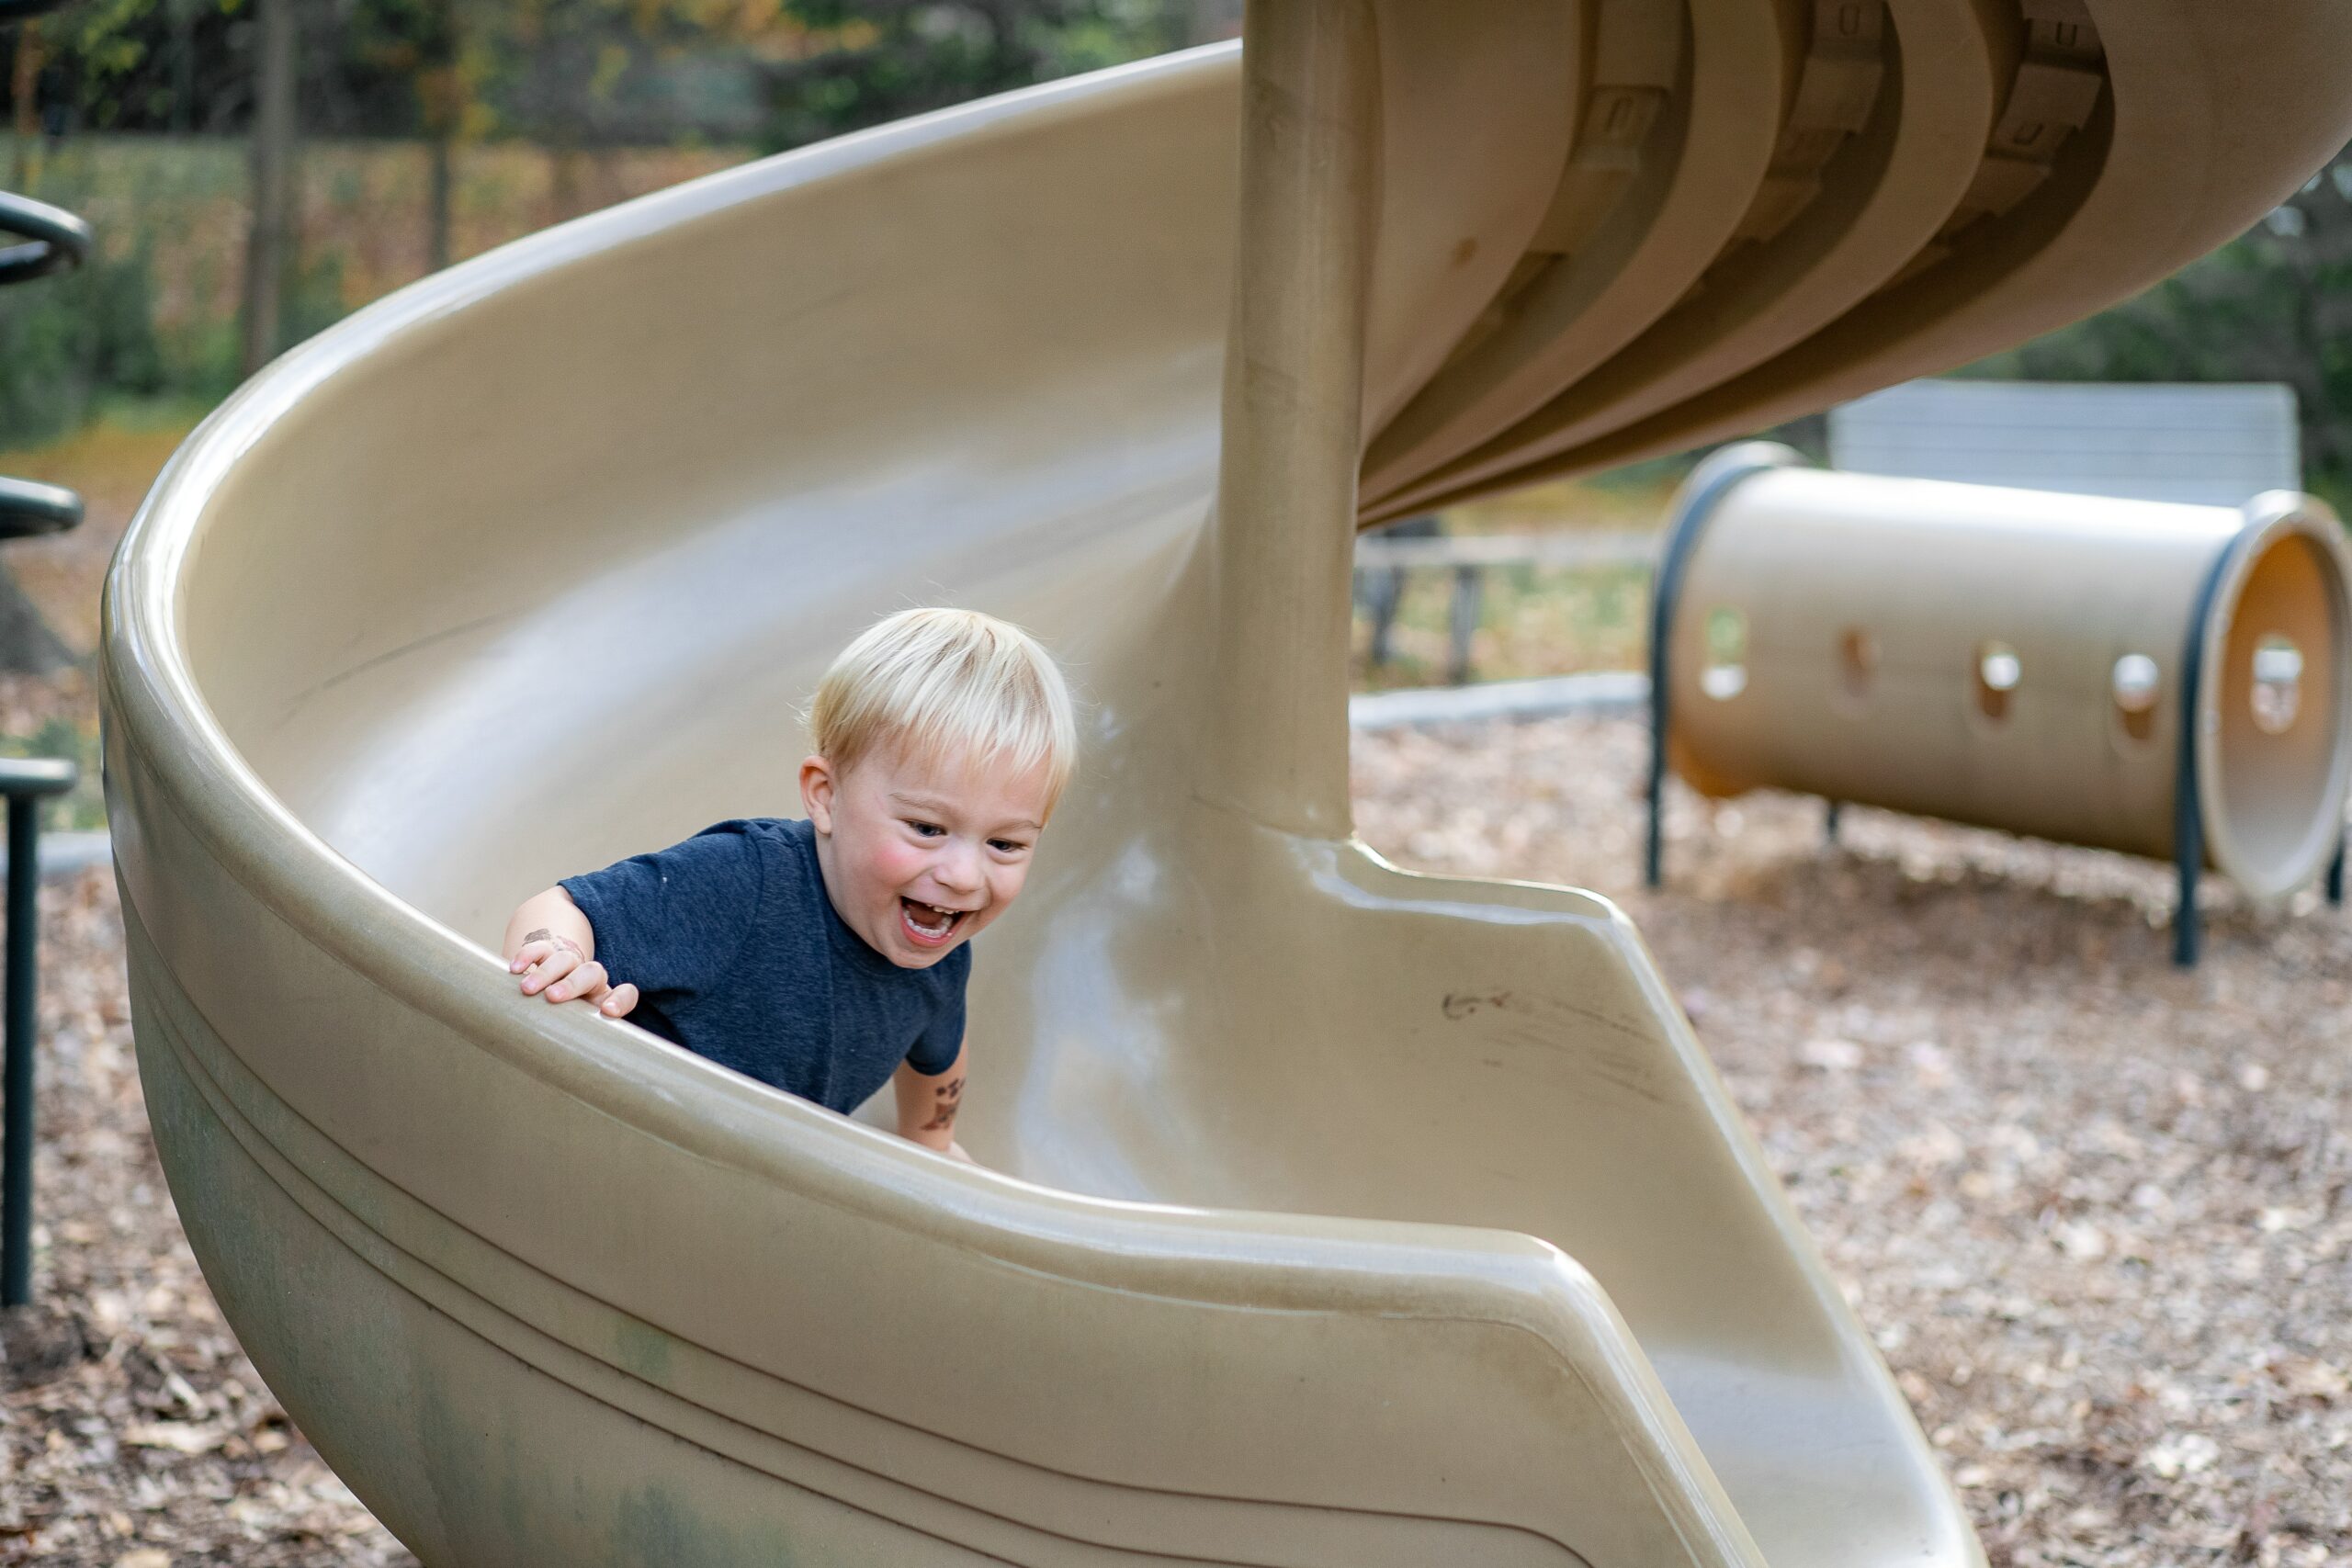 A child comes down a slide on a playground.